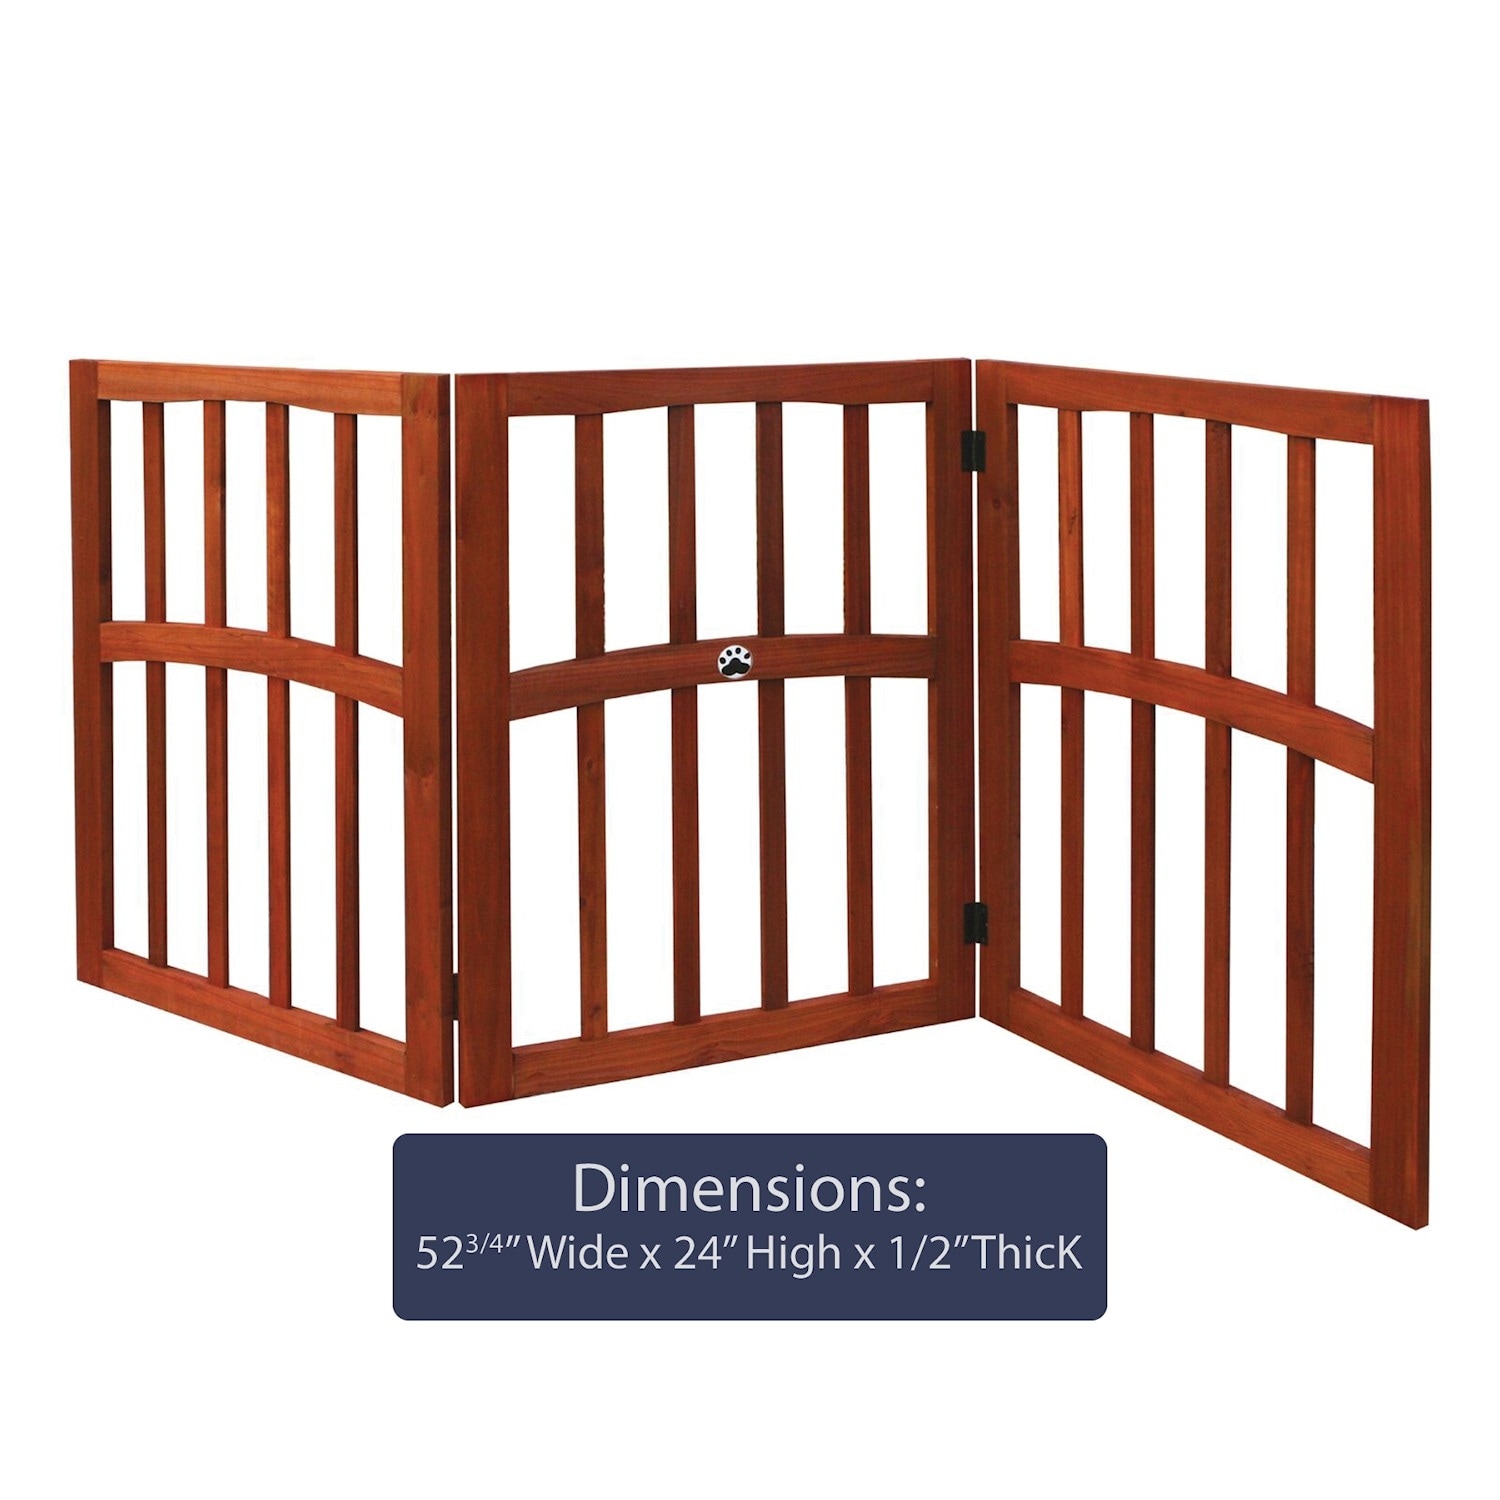 Tall Three Panel Wooden Paw Décor Wide 19 in Pet Dog Gate Free Standing 48 in